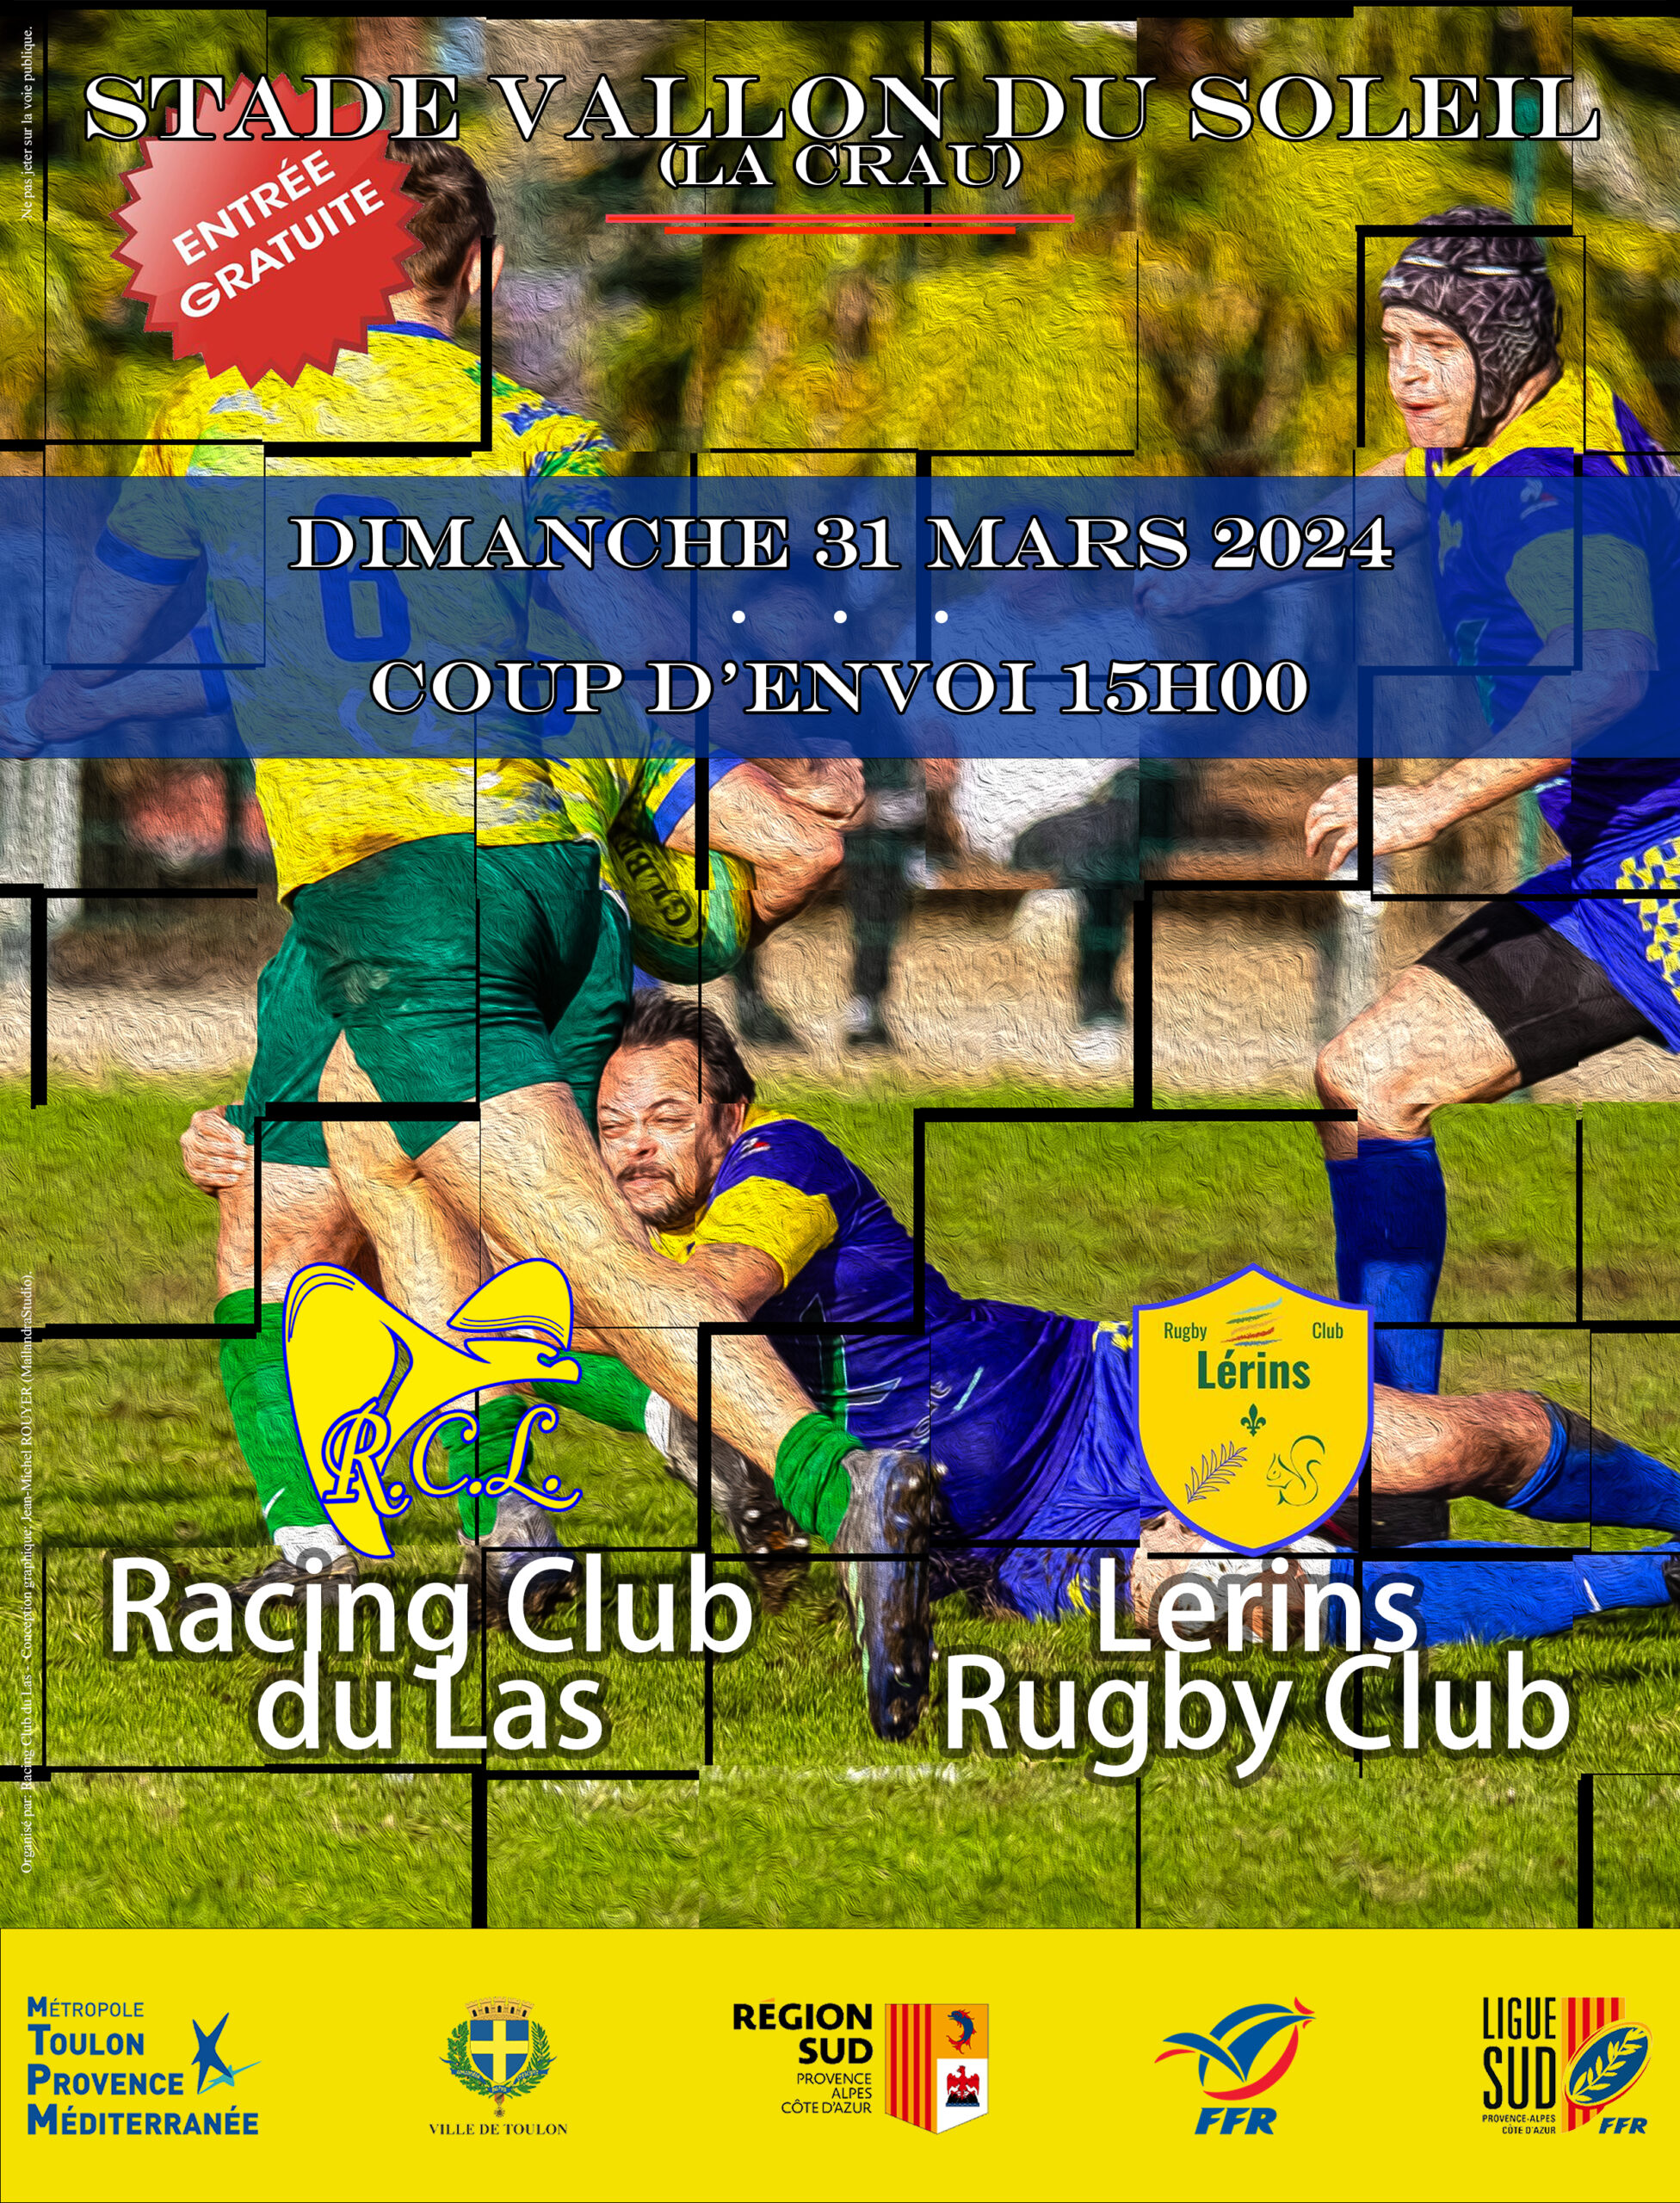 Featured image for “Réception Lérins Rugby Club”